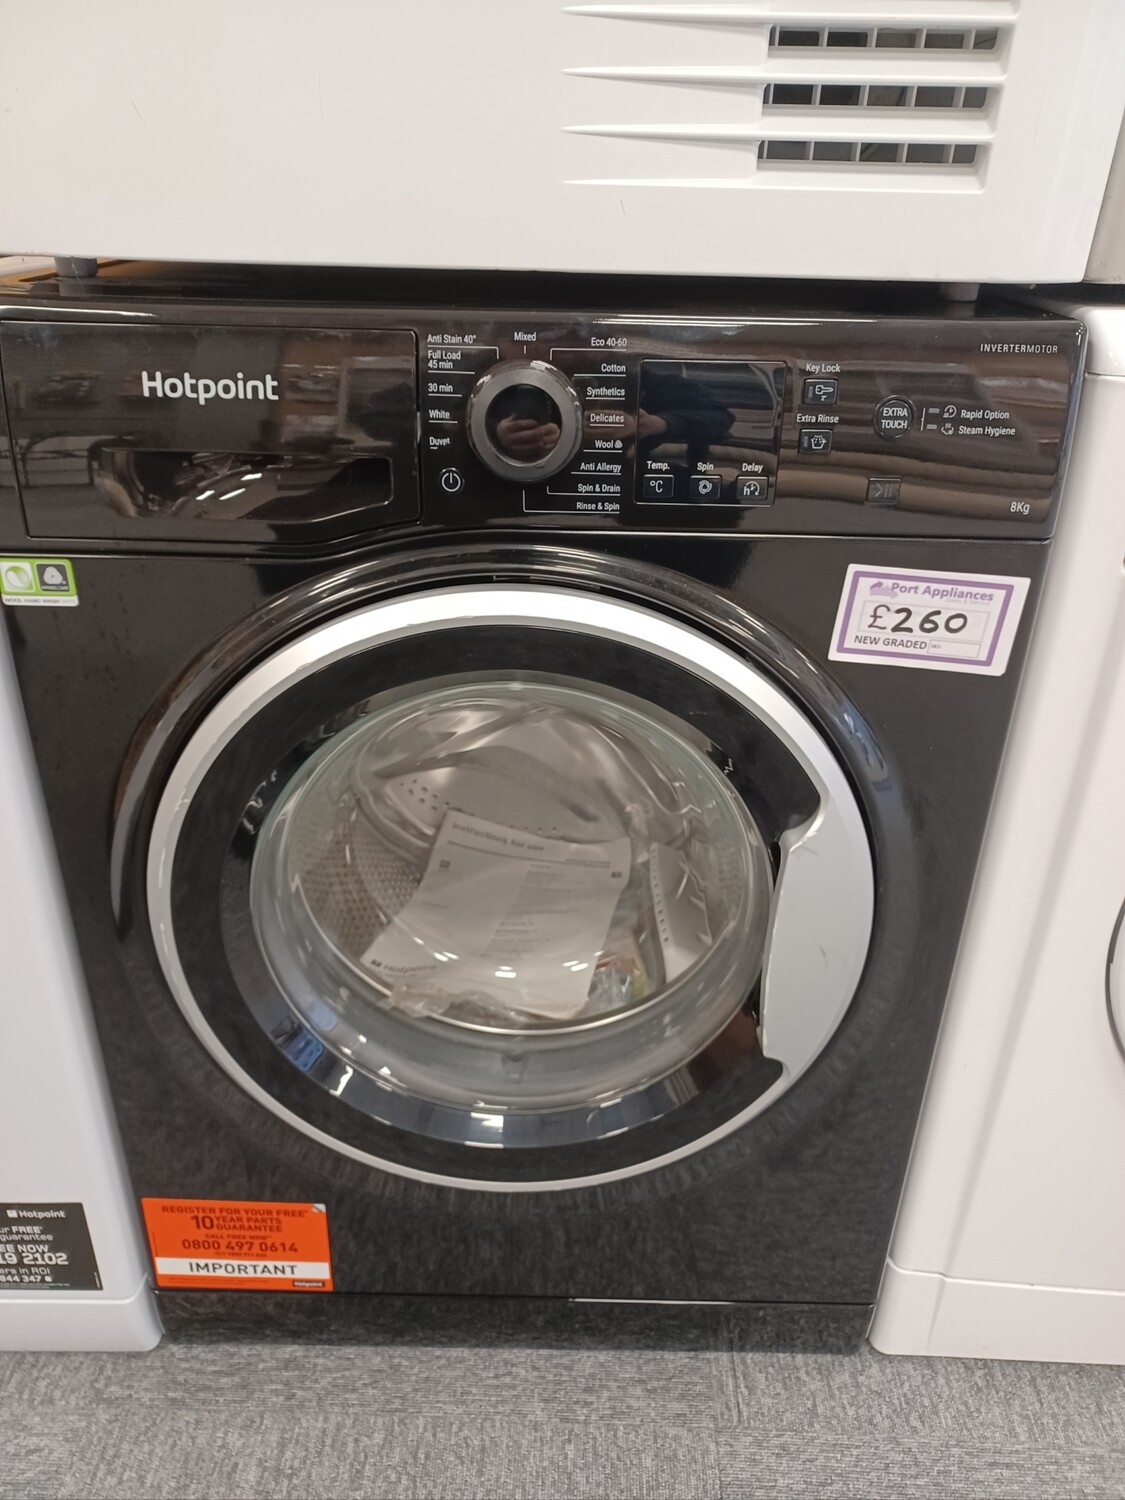 Hotpoint NSWM863CBSUKN 8kg Load, 1400 Spin Washing Machine - Black - New Graded + 1 Year Guarantee. Located In our Whitby Road Shop